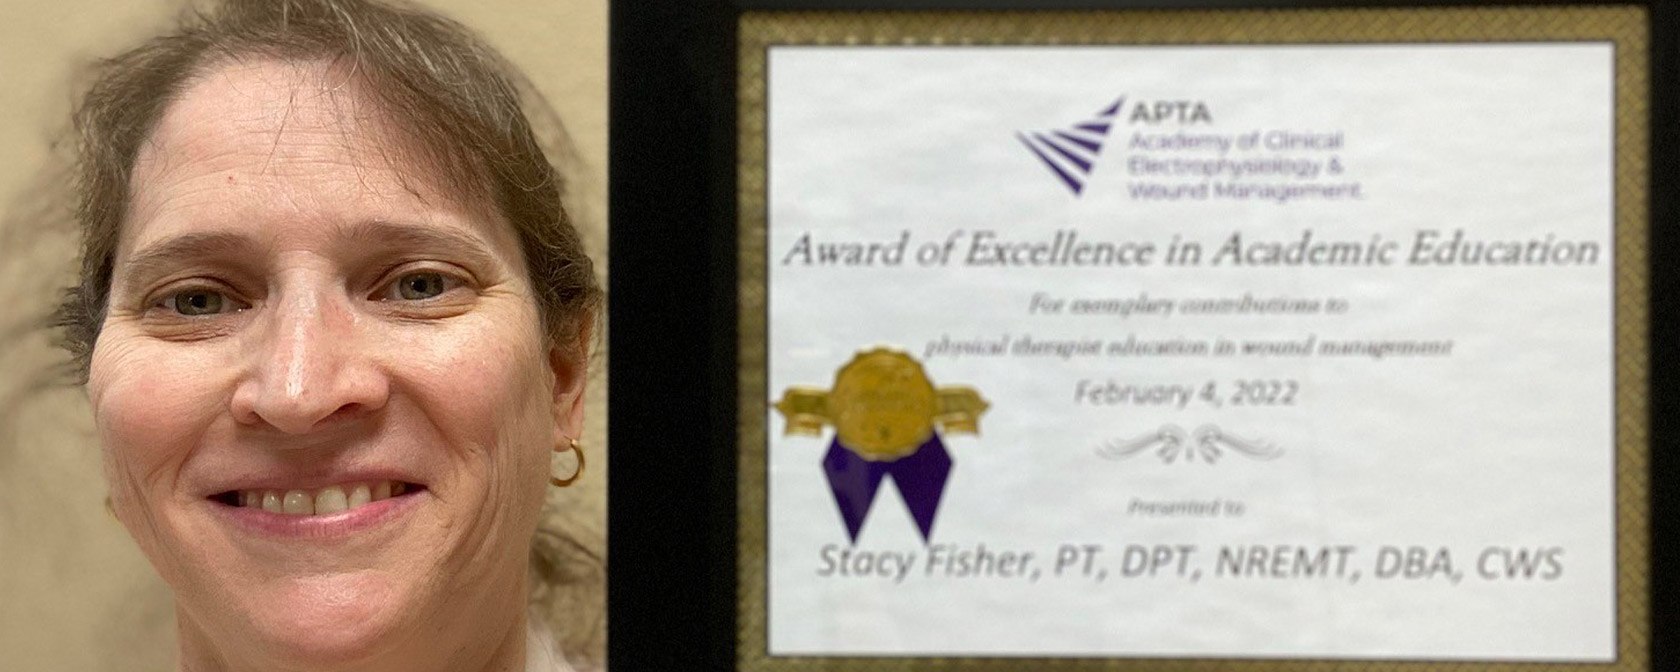 Dr. Fisher holding her Award of Excellence in Academic Education